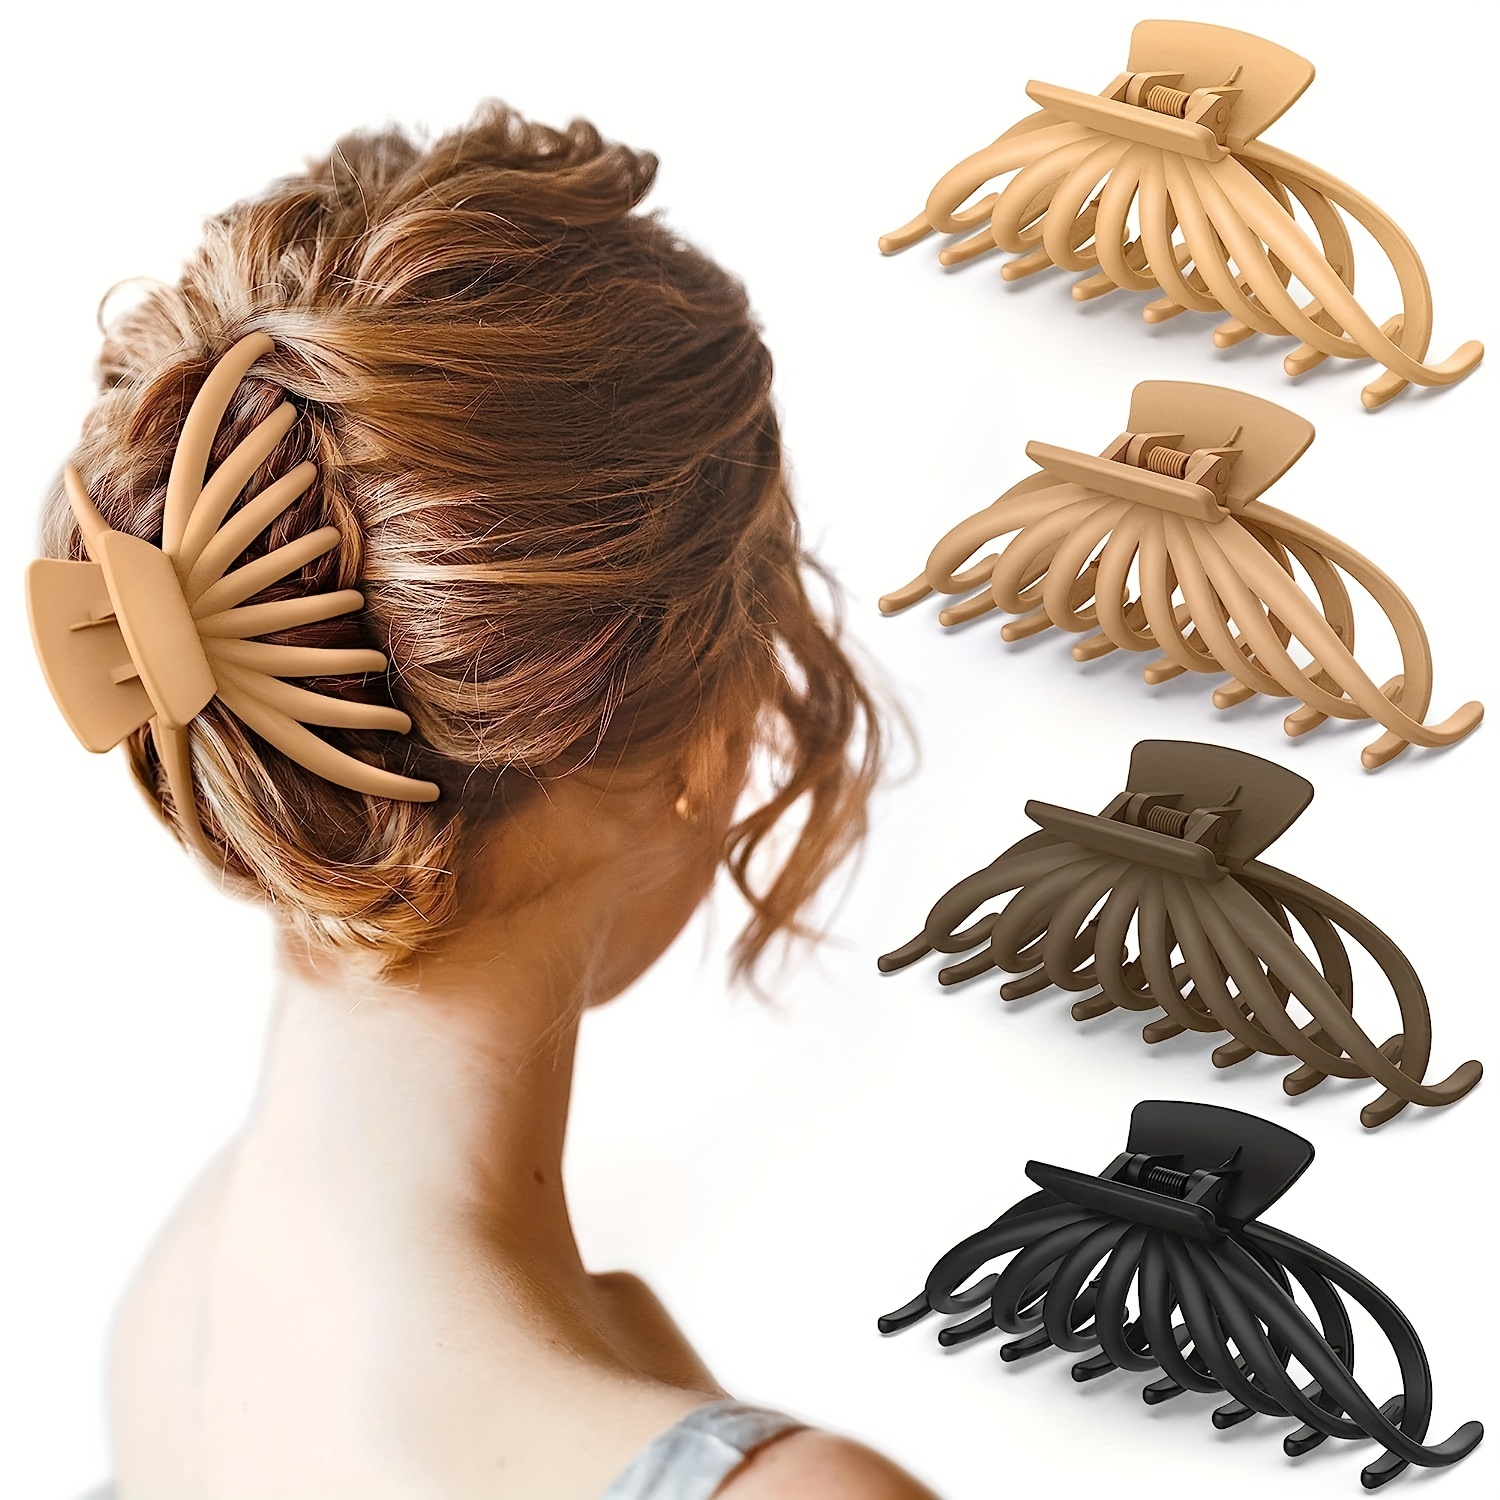 Hair Clips: They are back!